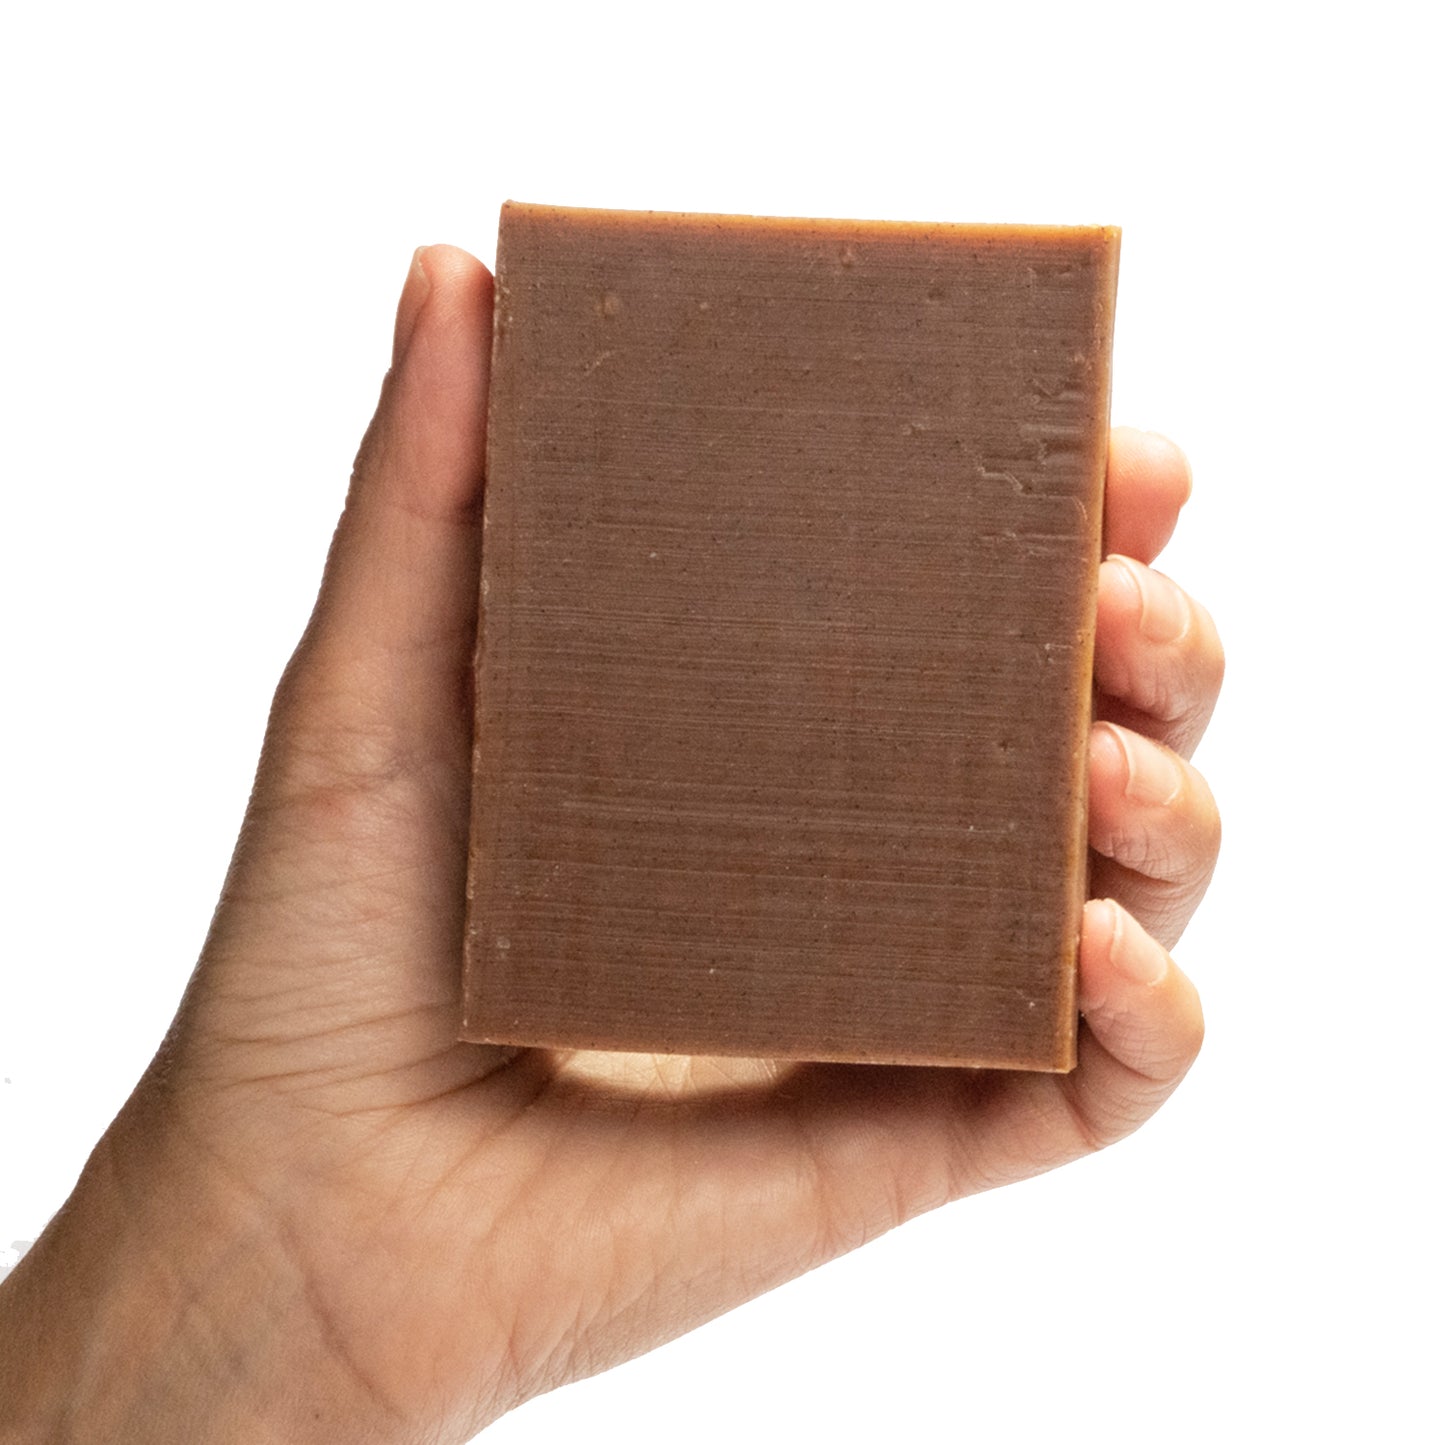 naked Backbone cinnamon essential oil organic bar soap from ground Soap in hand.